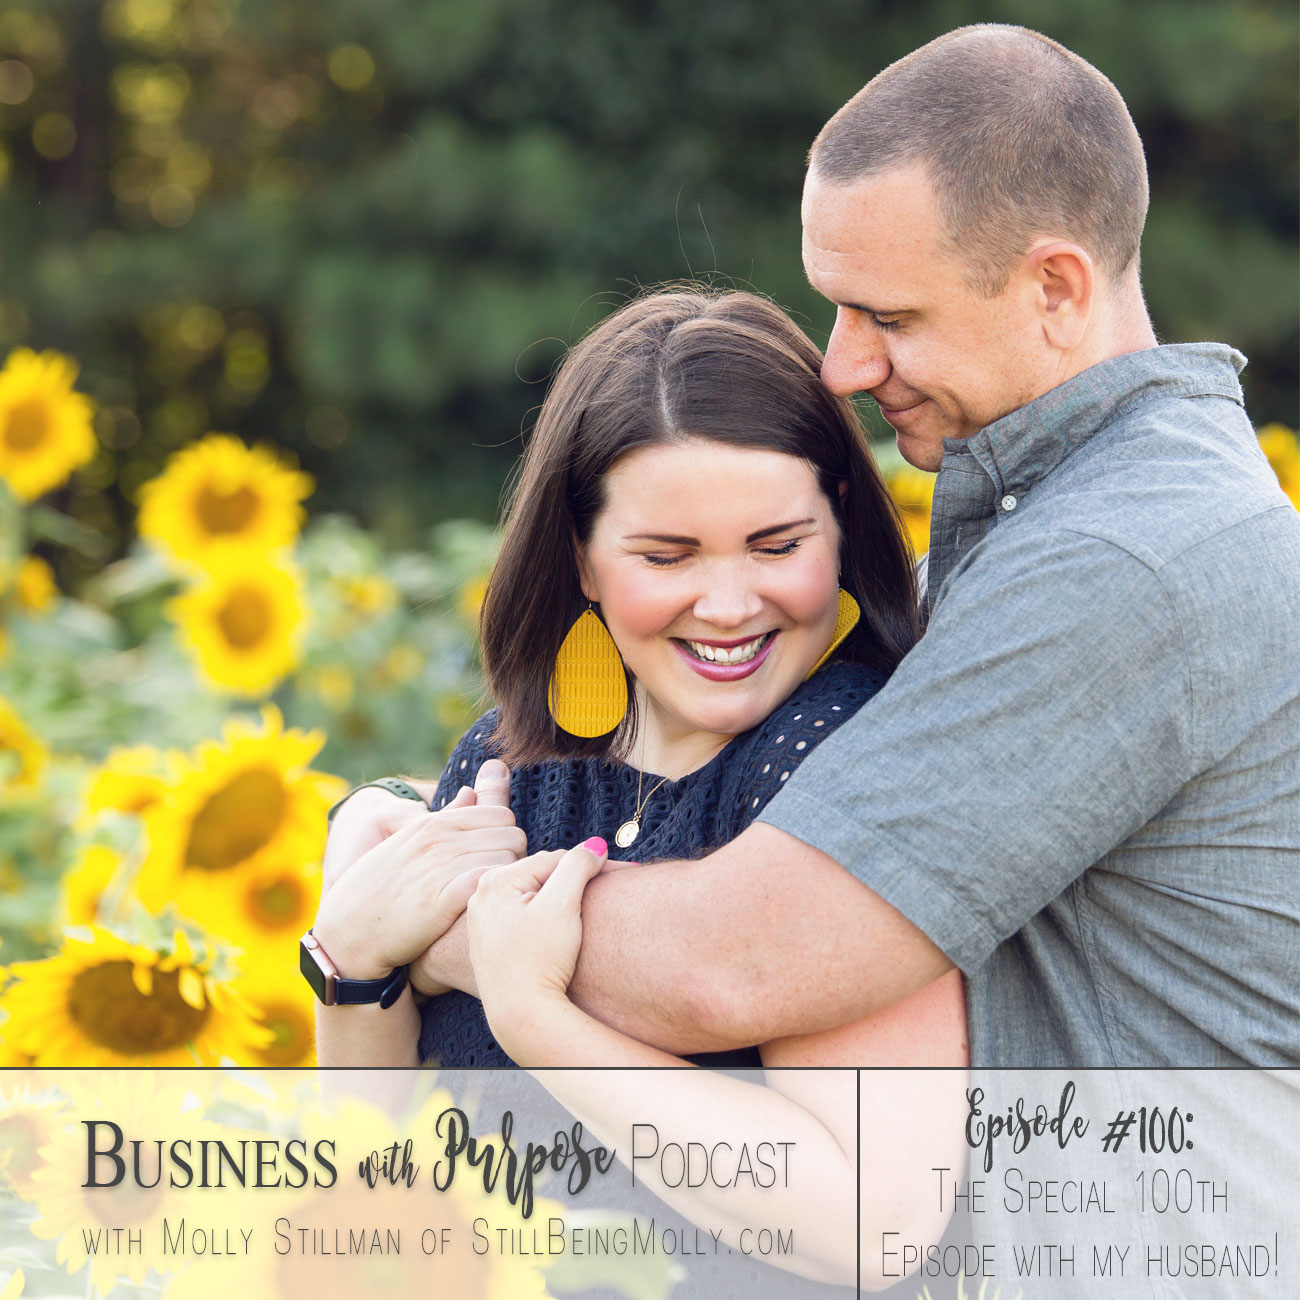 Business with Purpose Podcast EP 100: The 100th Episode Spectacular with Guest - MY HUSBAND!